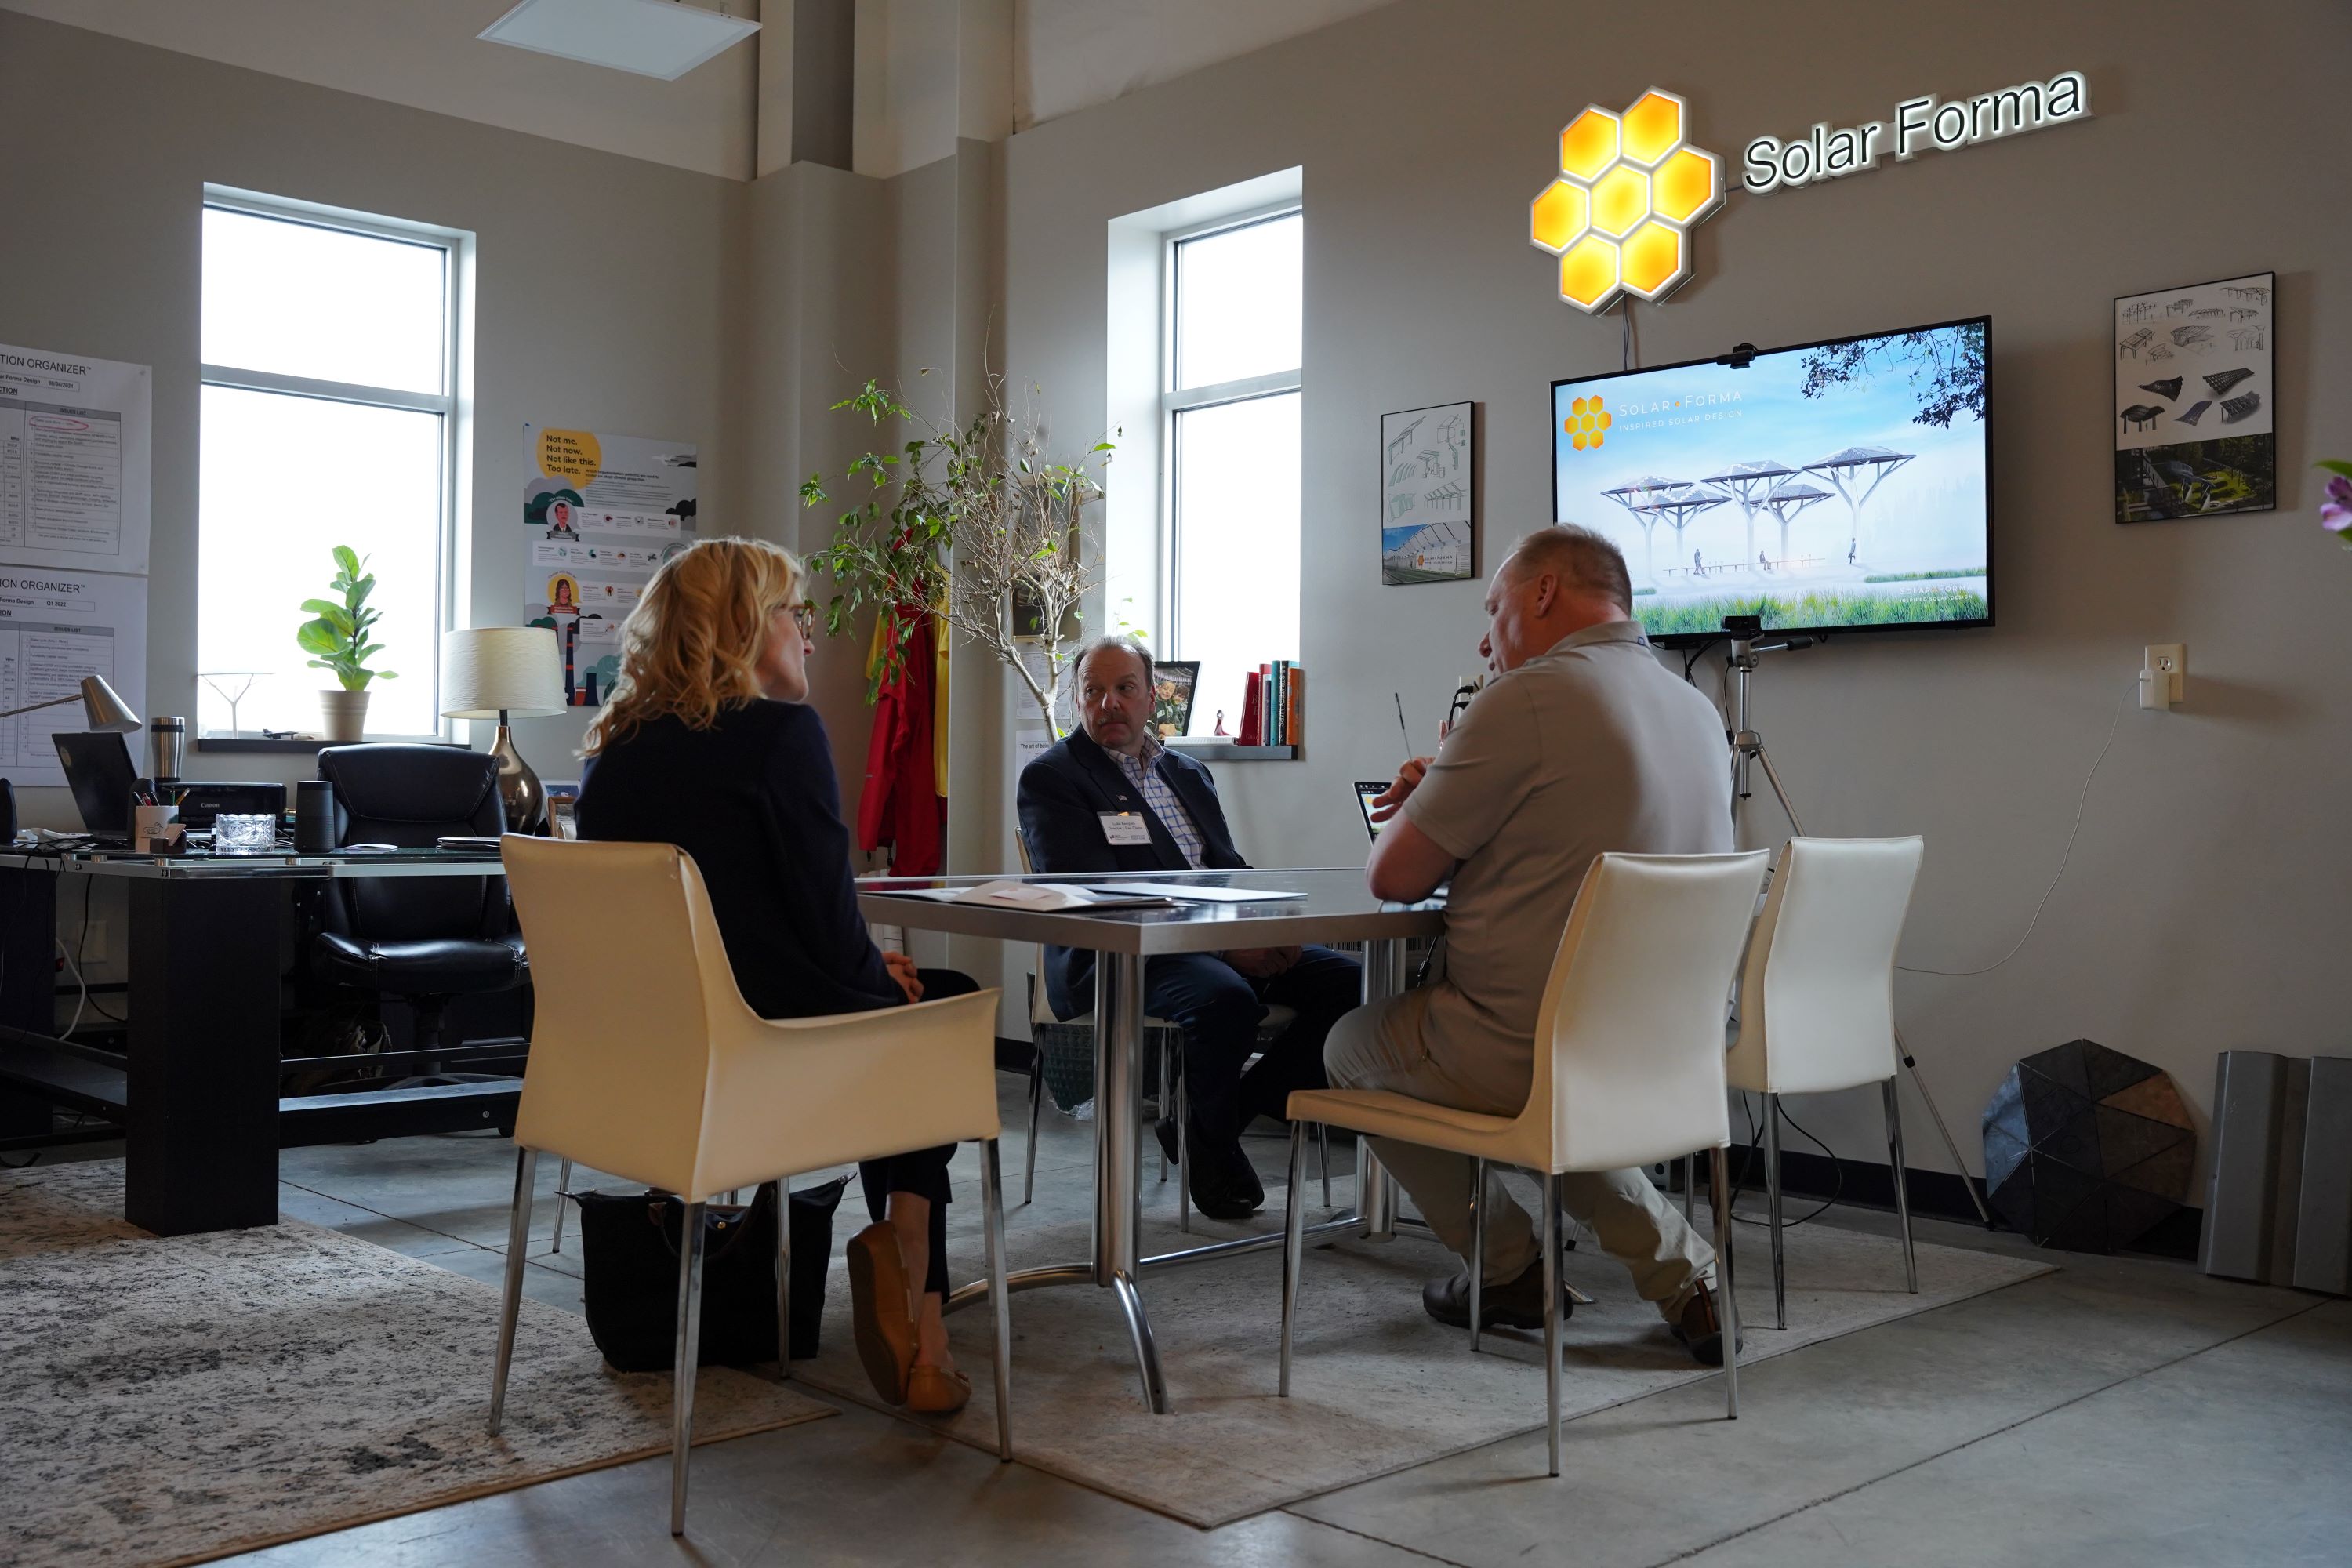 Sec. Godlewski at a meeting with Solar Forma Design in Eau Claire.